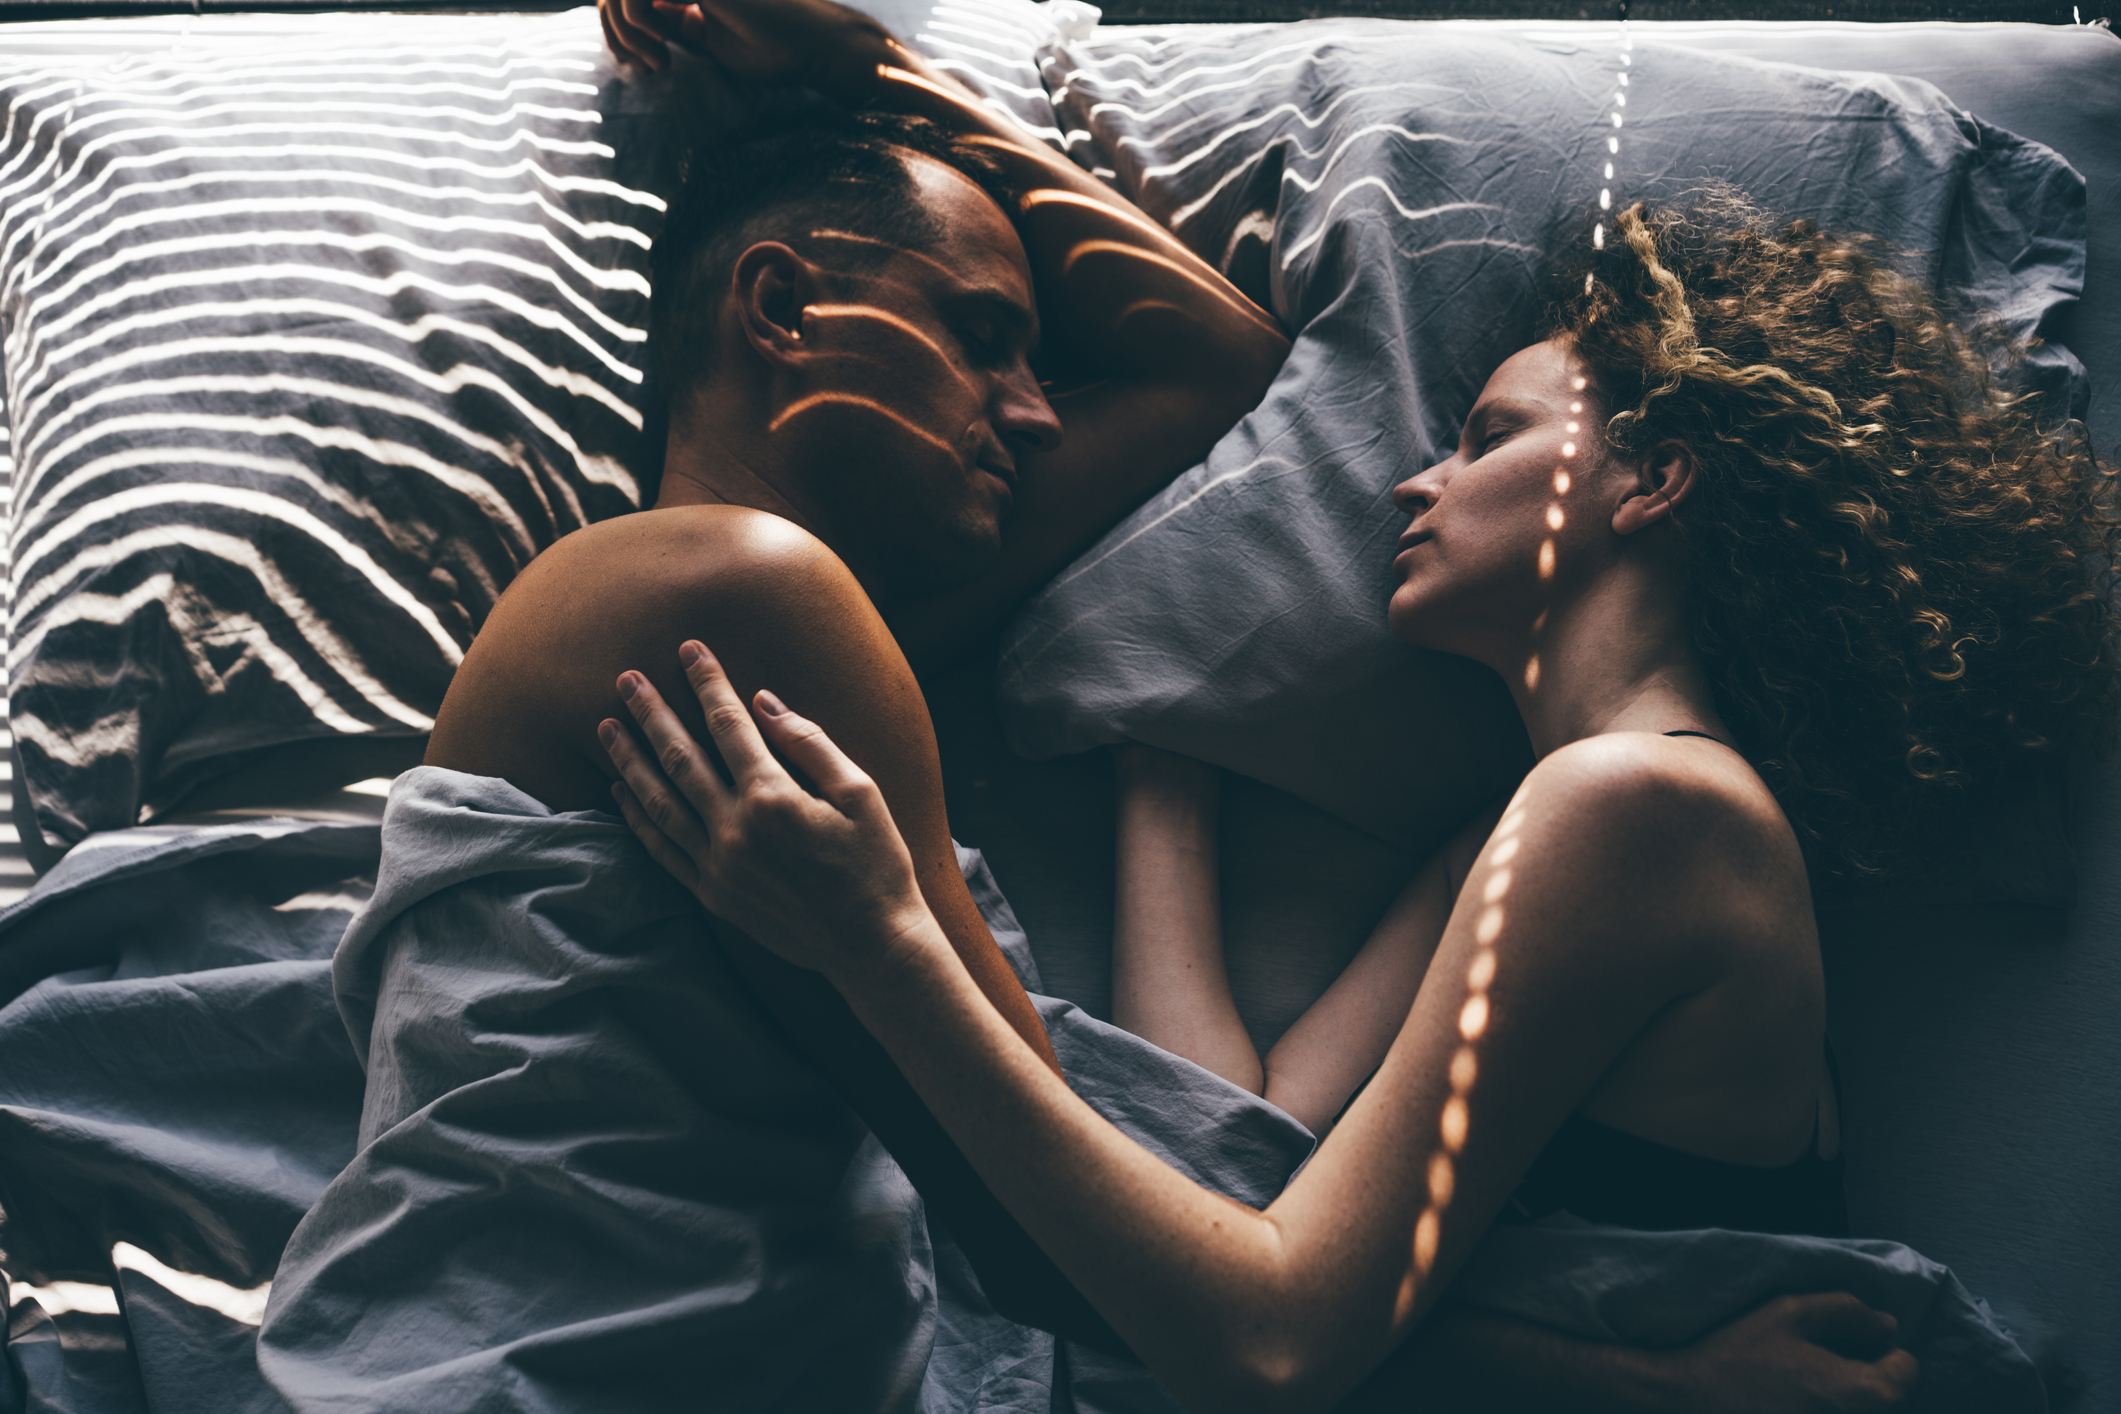 Intimate couple embracing in bed, portraying emotional connection and romance